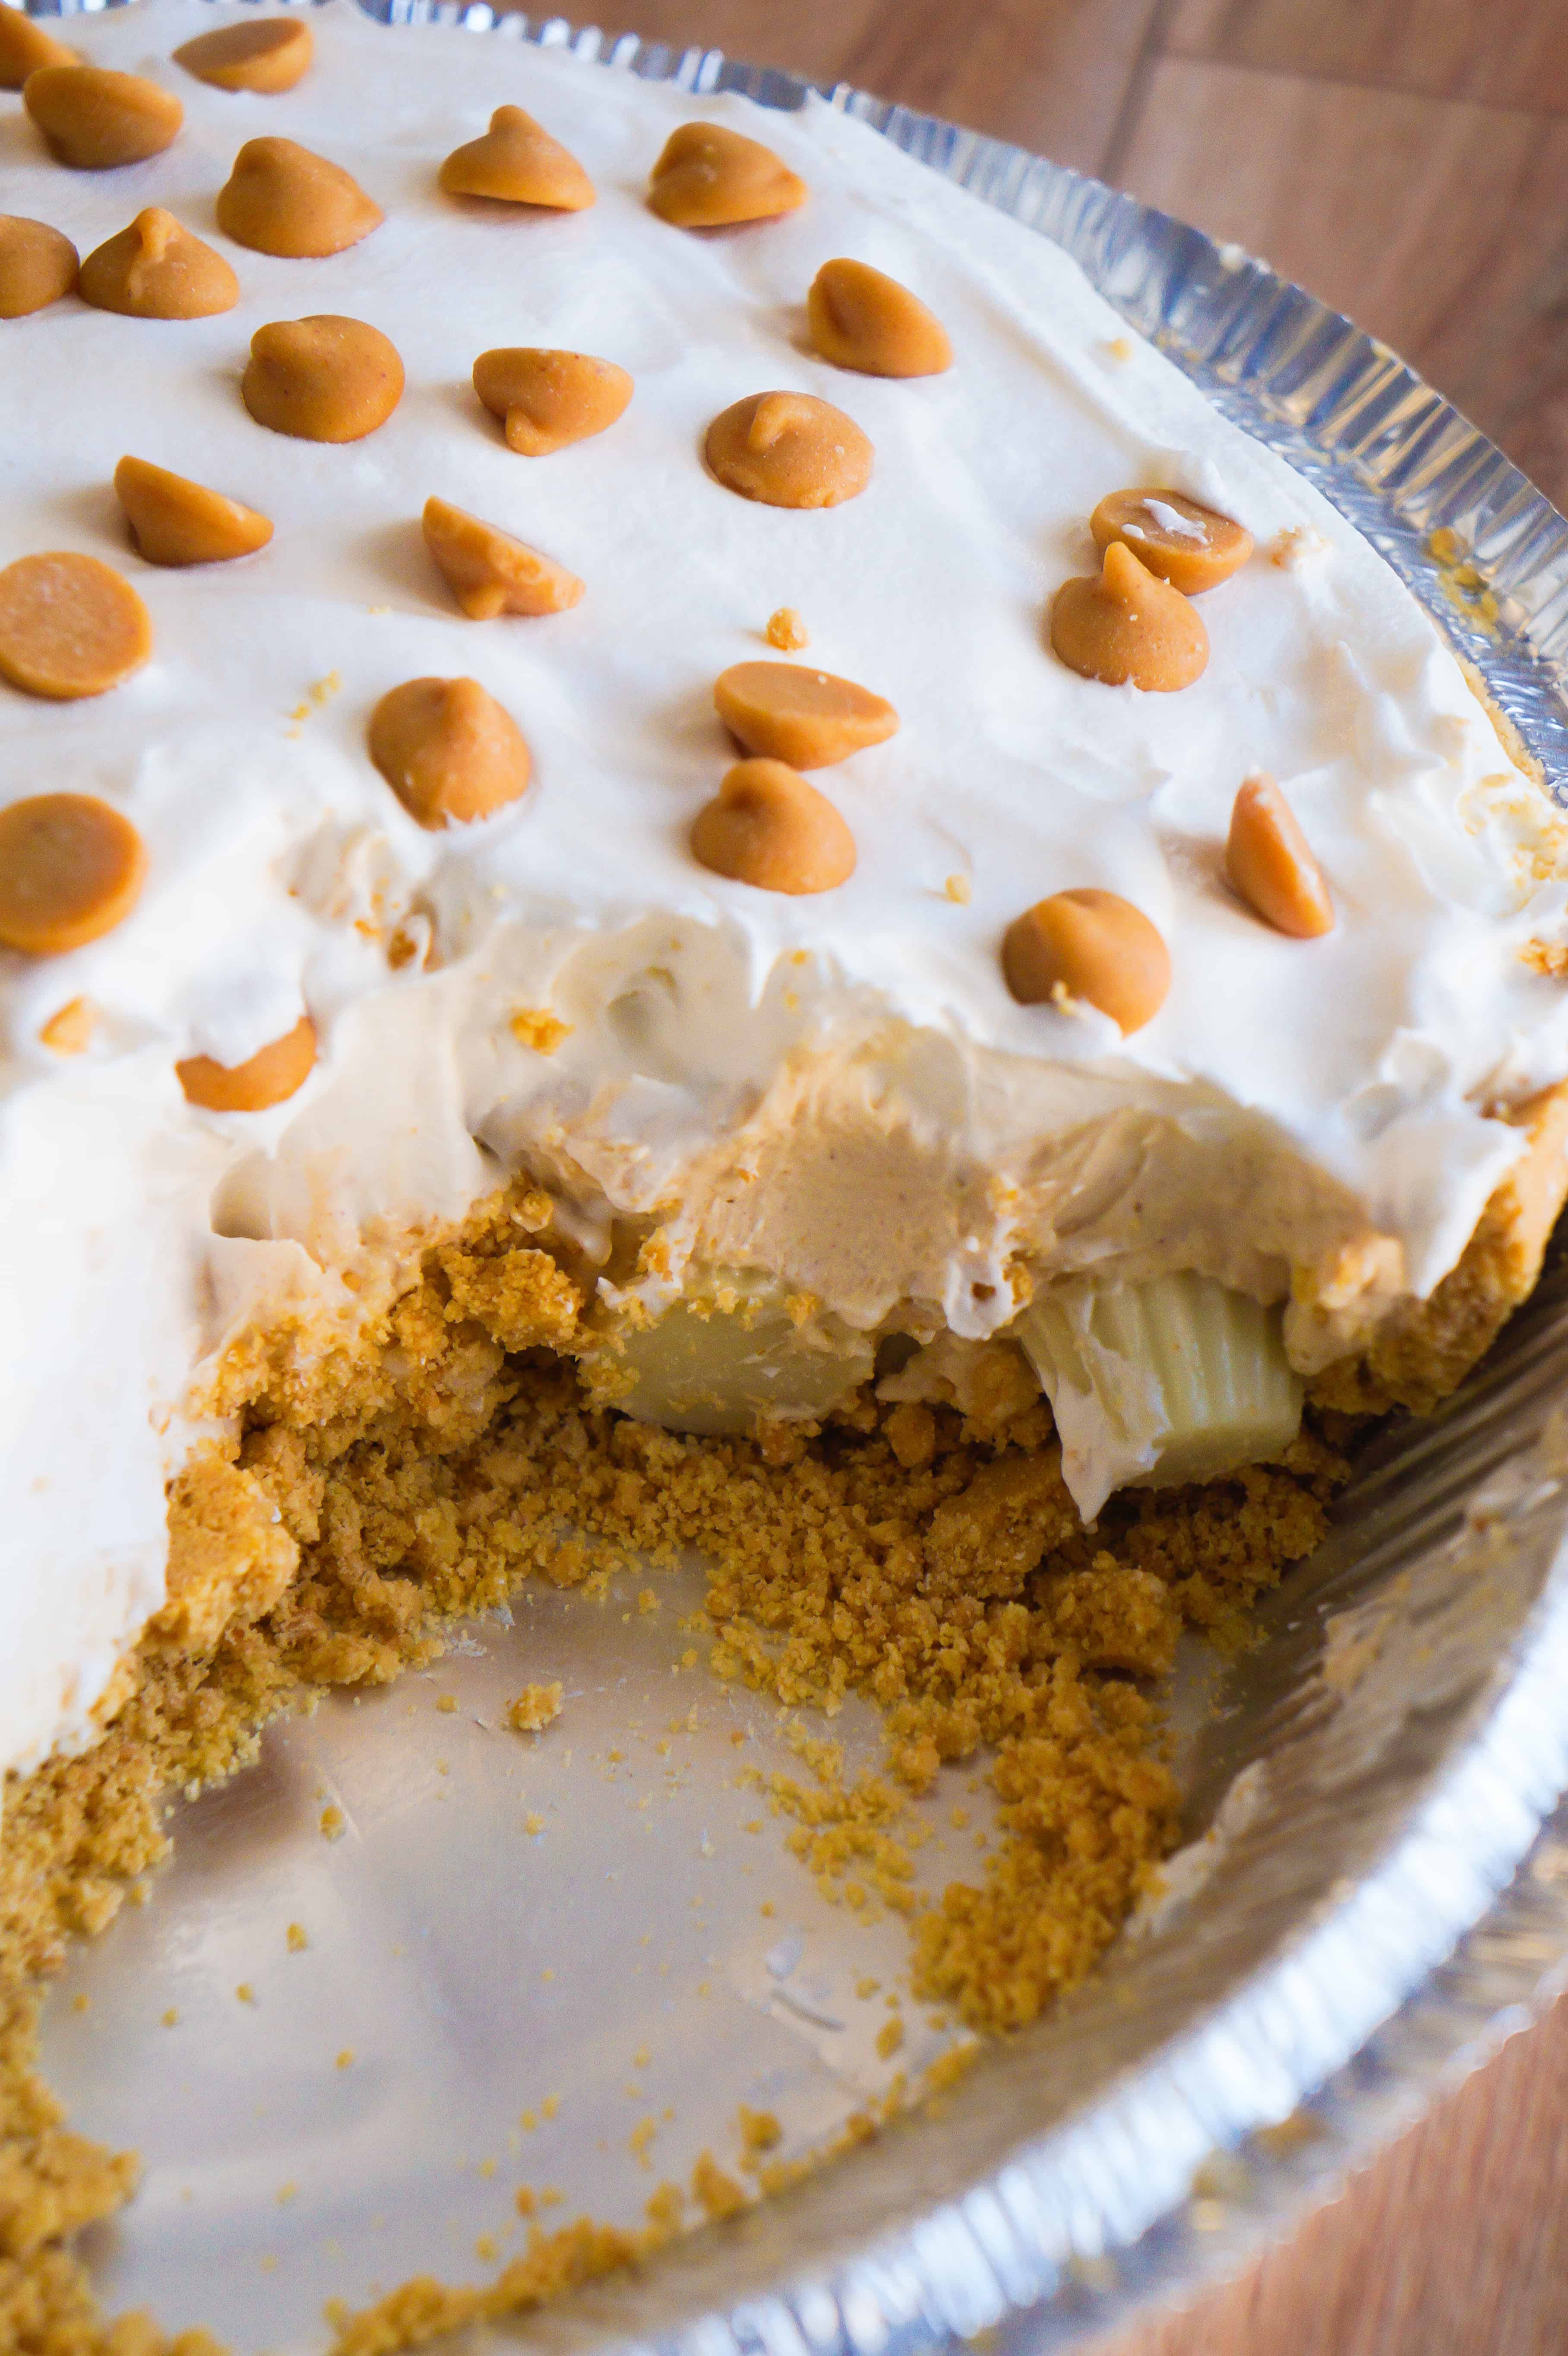 White Chocolate Peanut Butter Pie is an easy no bake dessert recipe. A graham crust is filled with white chocolate pudding and mini Reese's white chocolate peanut butter cups.